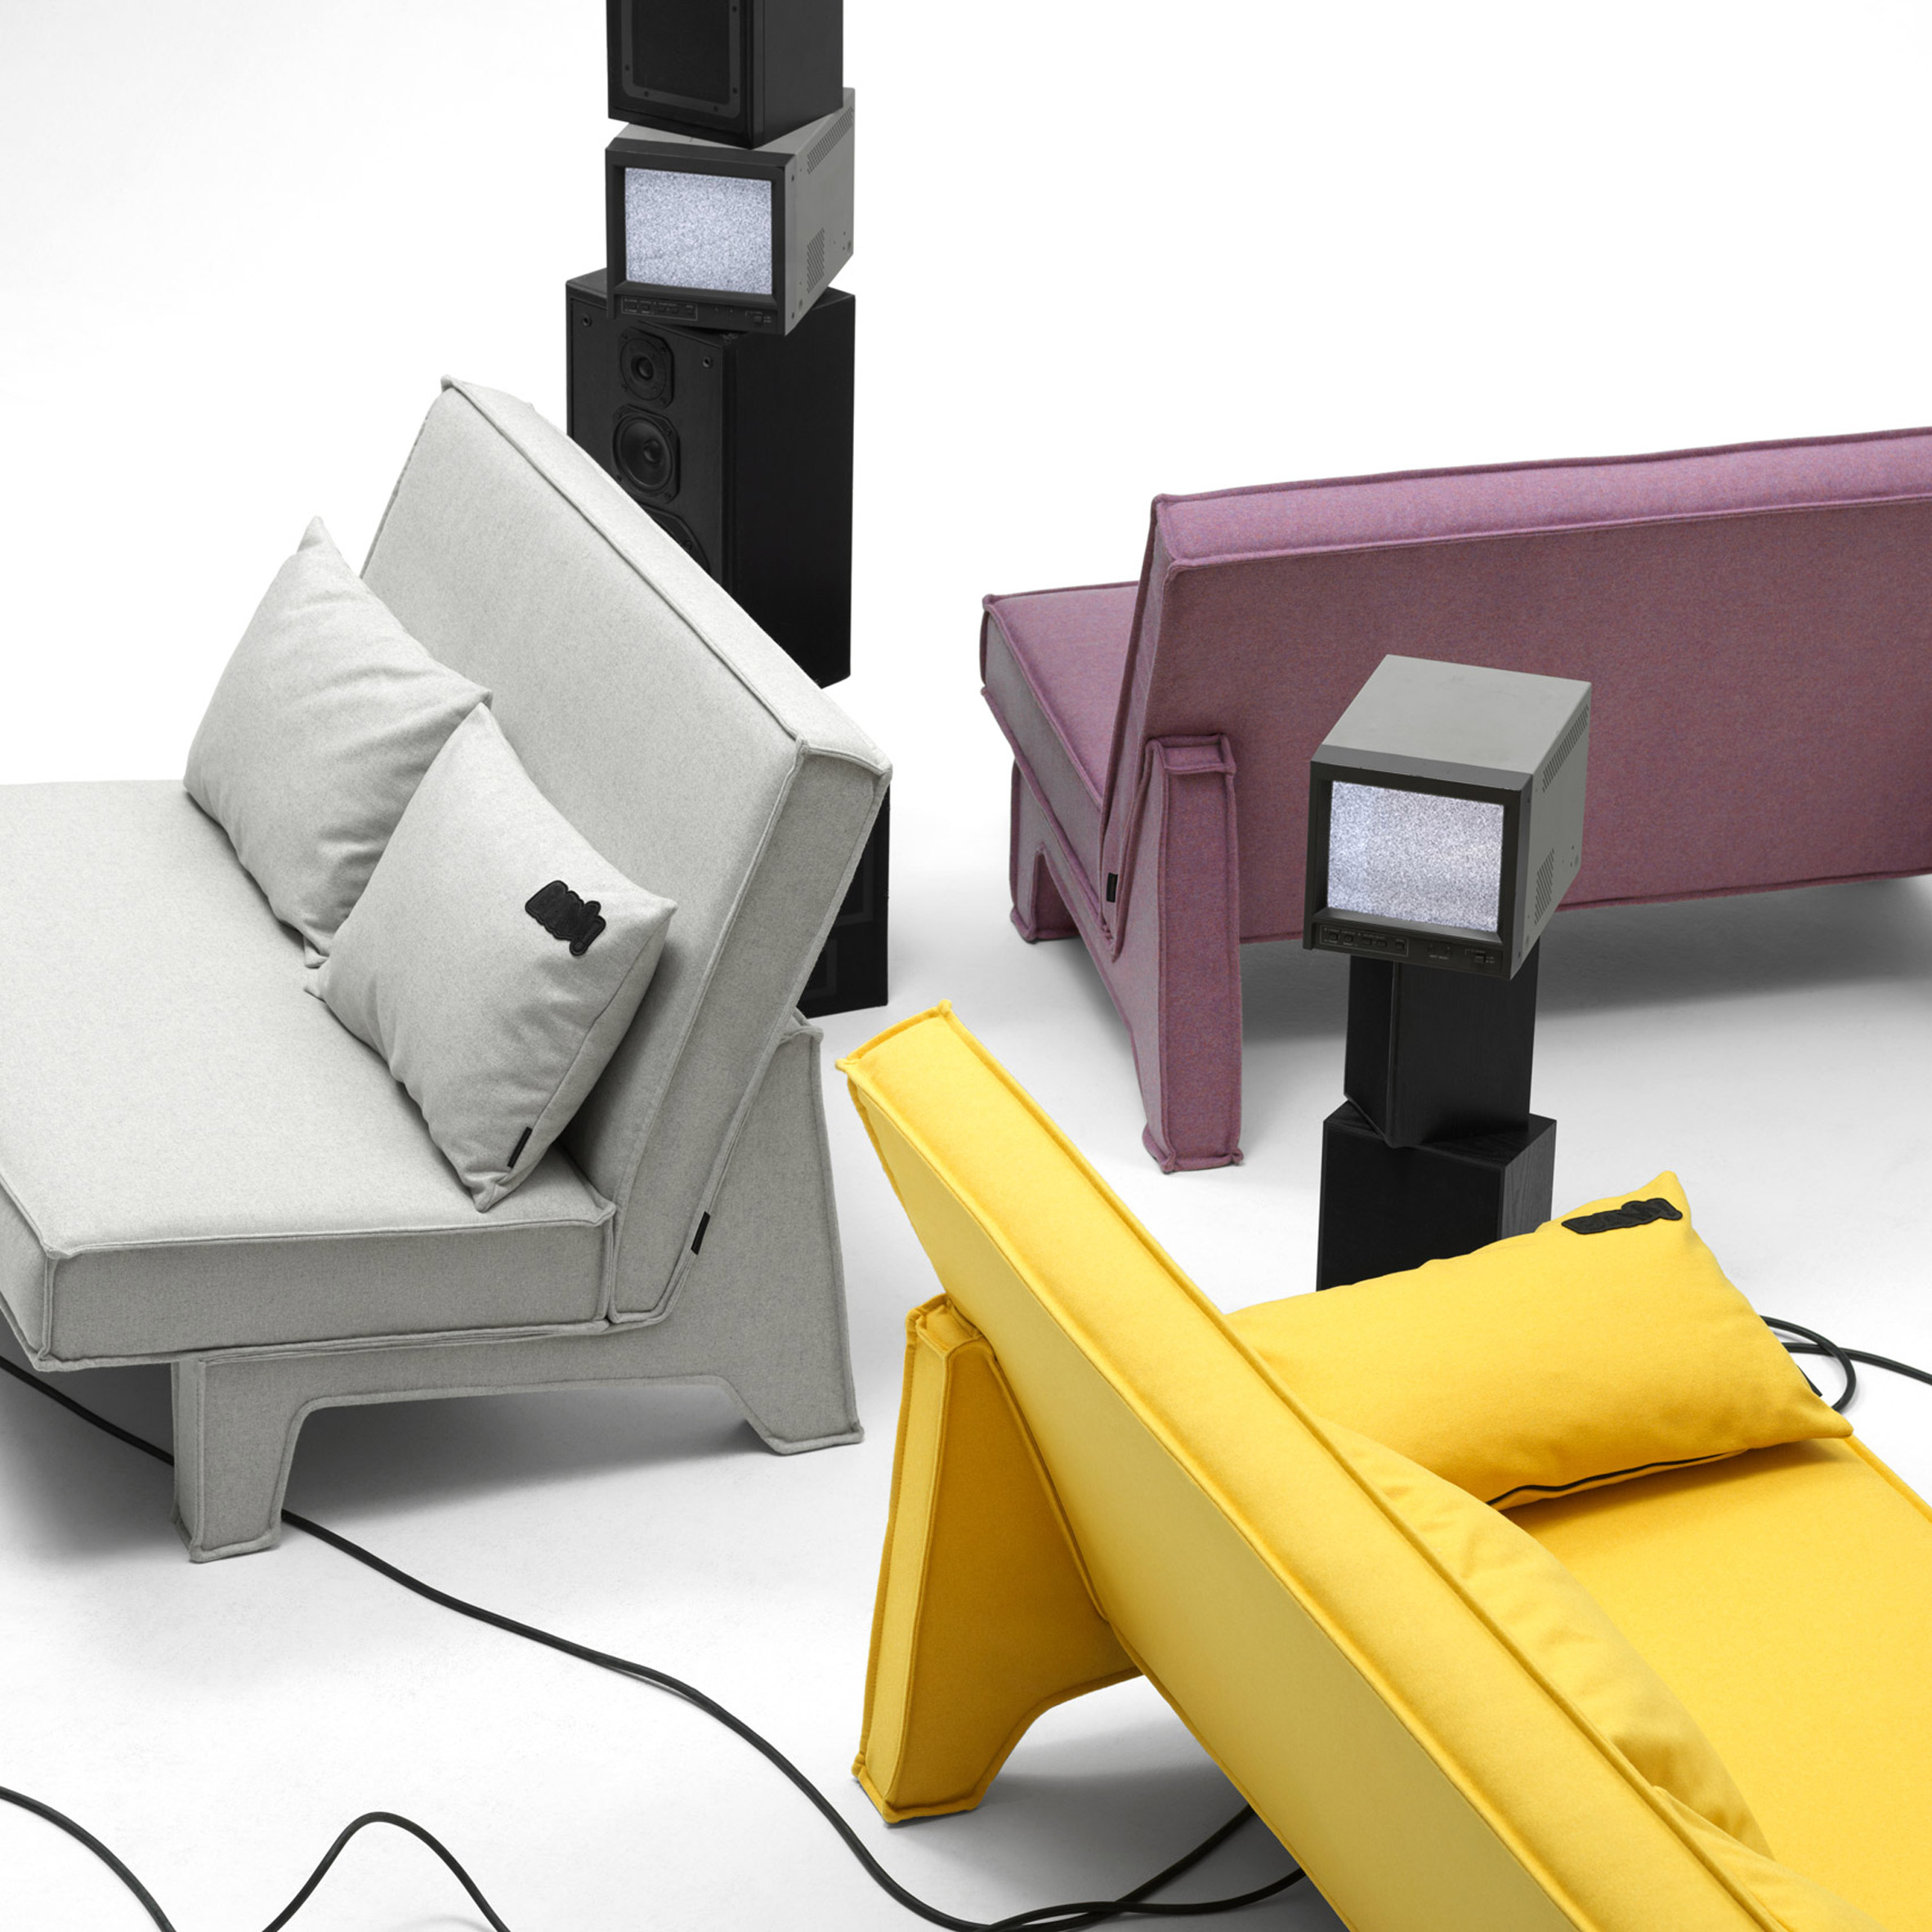 BAM! sofa by Massproductions